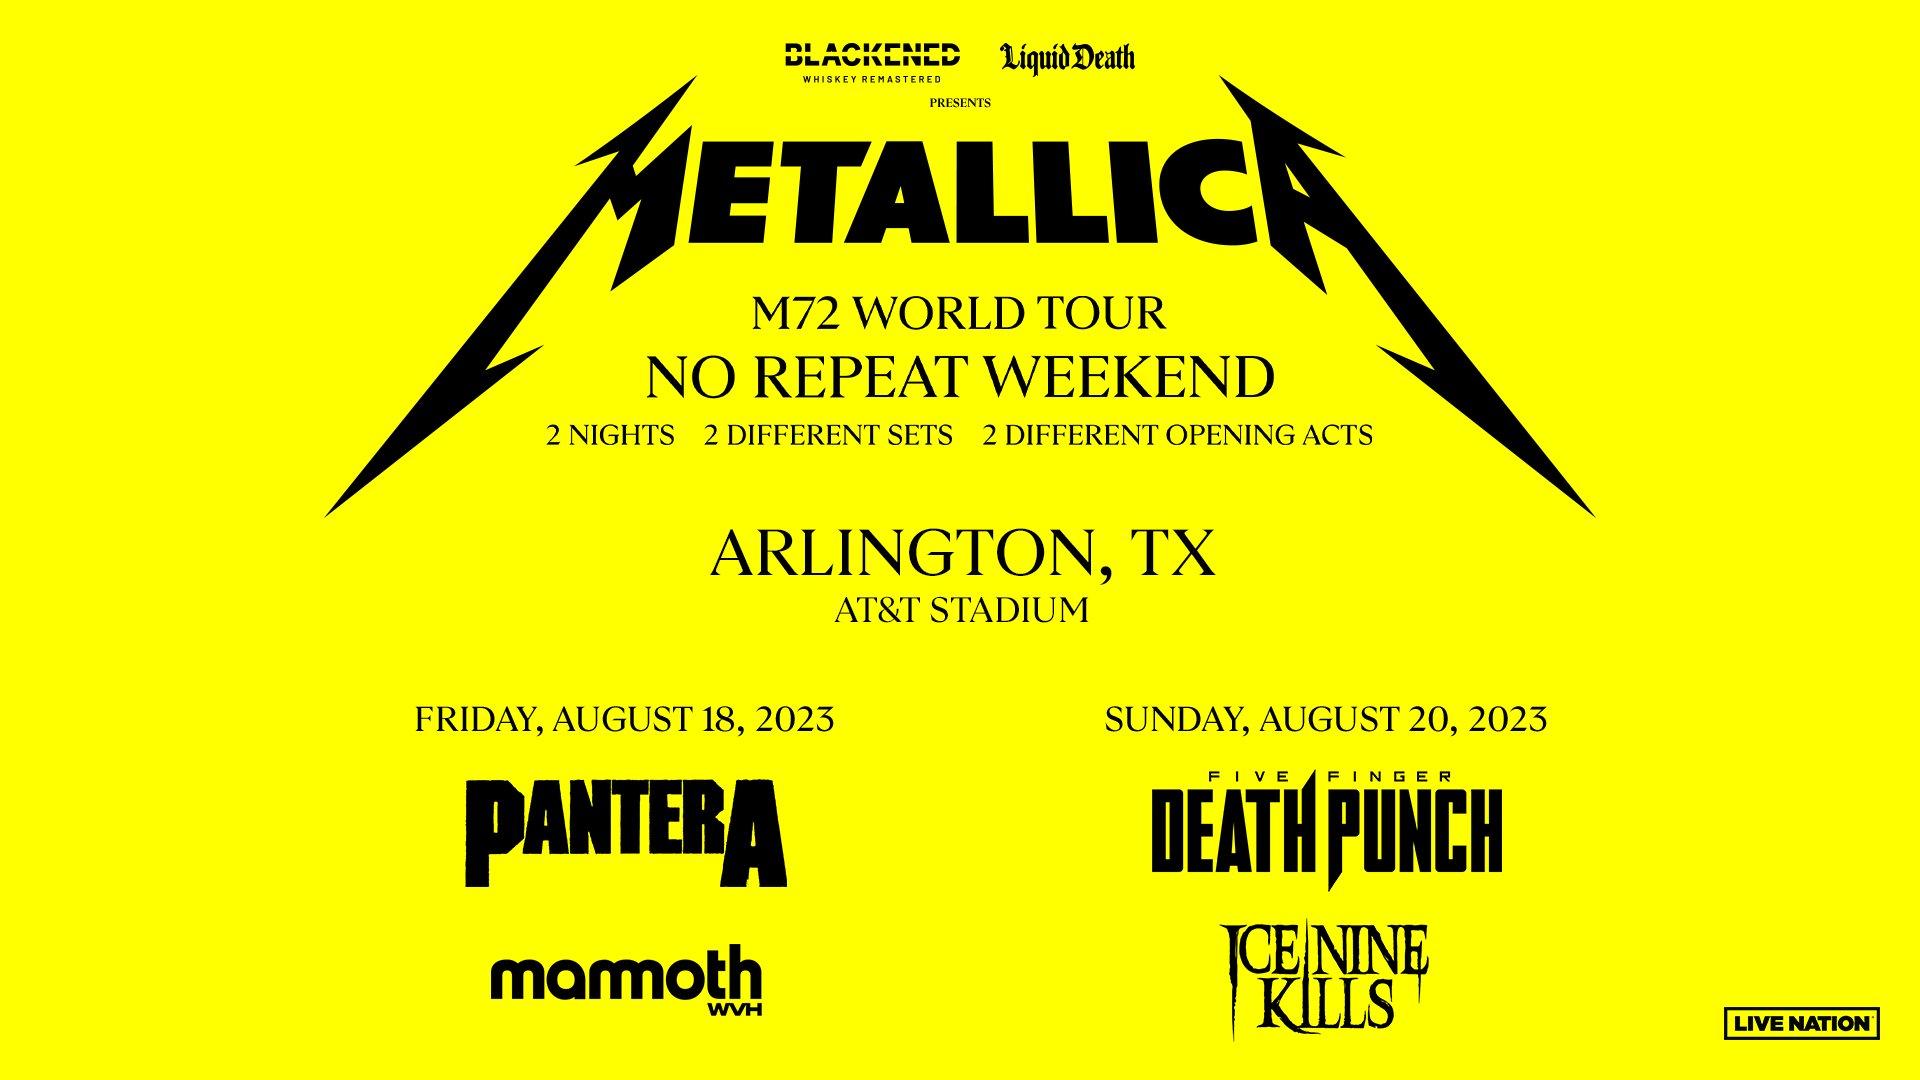 Metallica at AT&T Stadium in Arlington, TX, United States on August 20